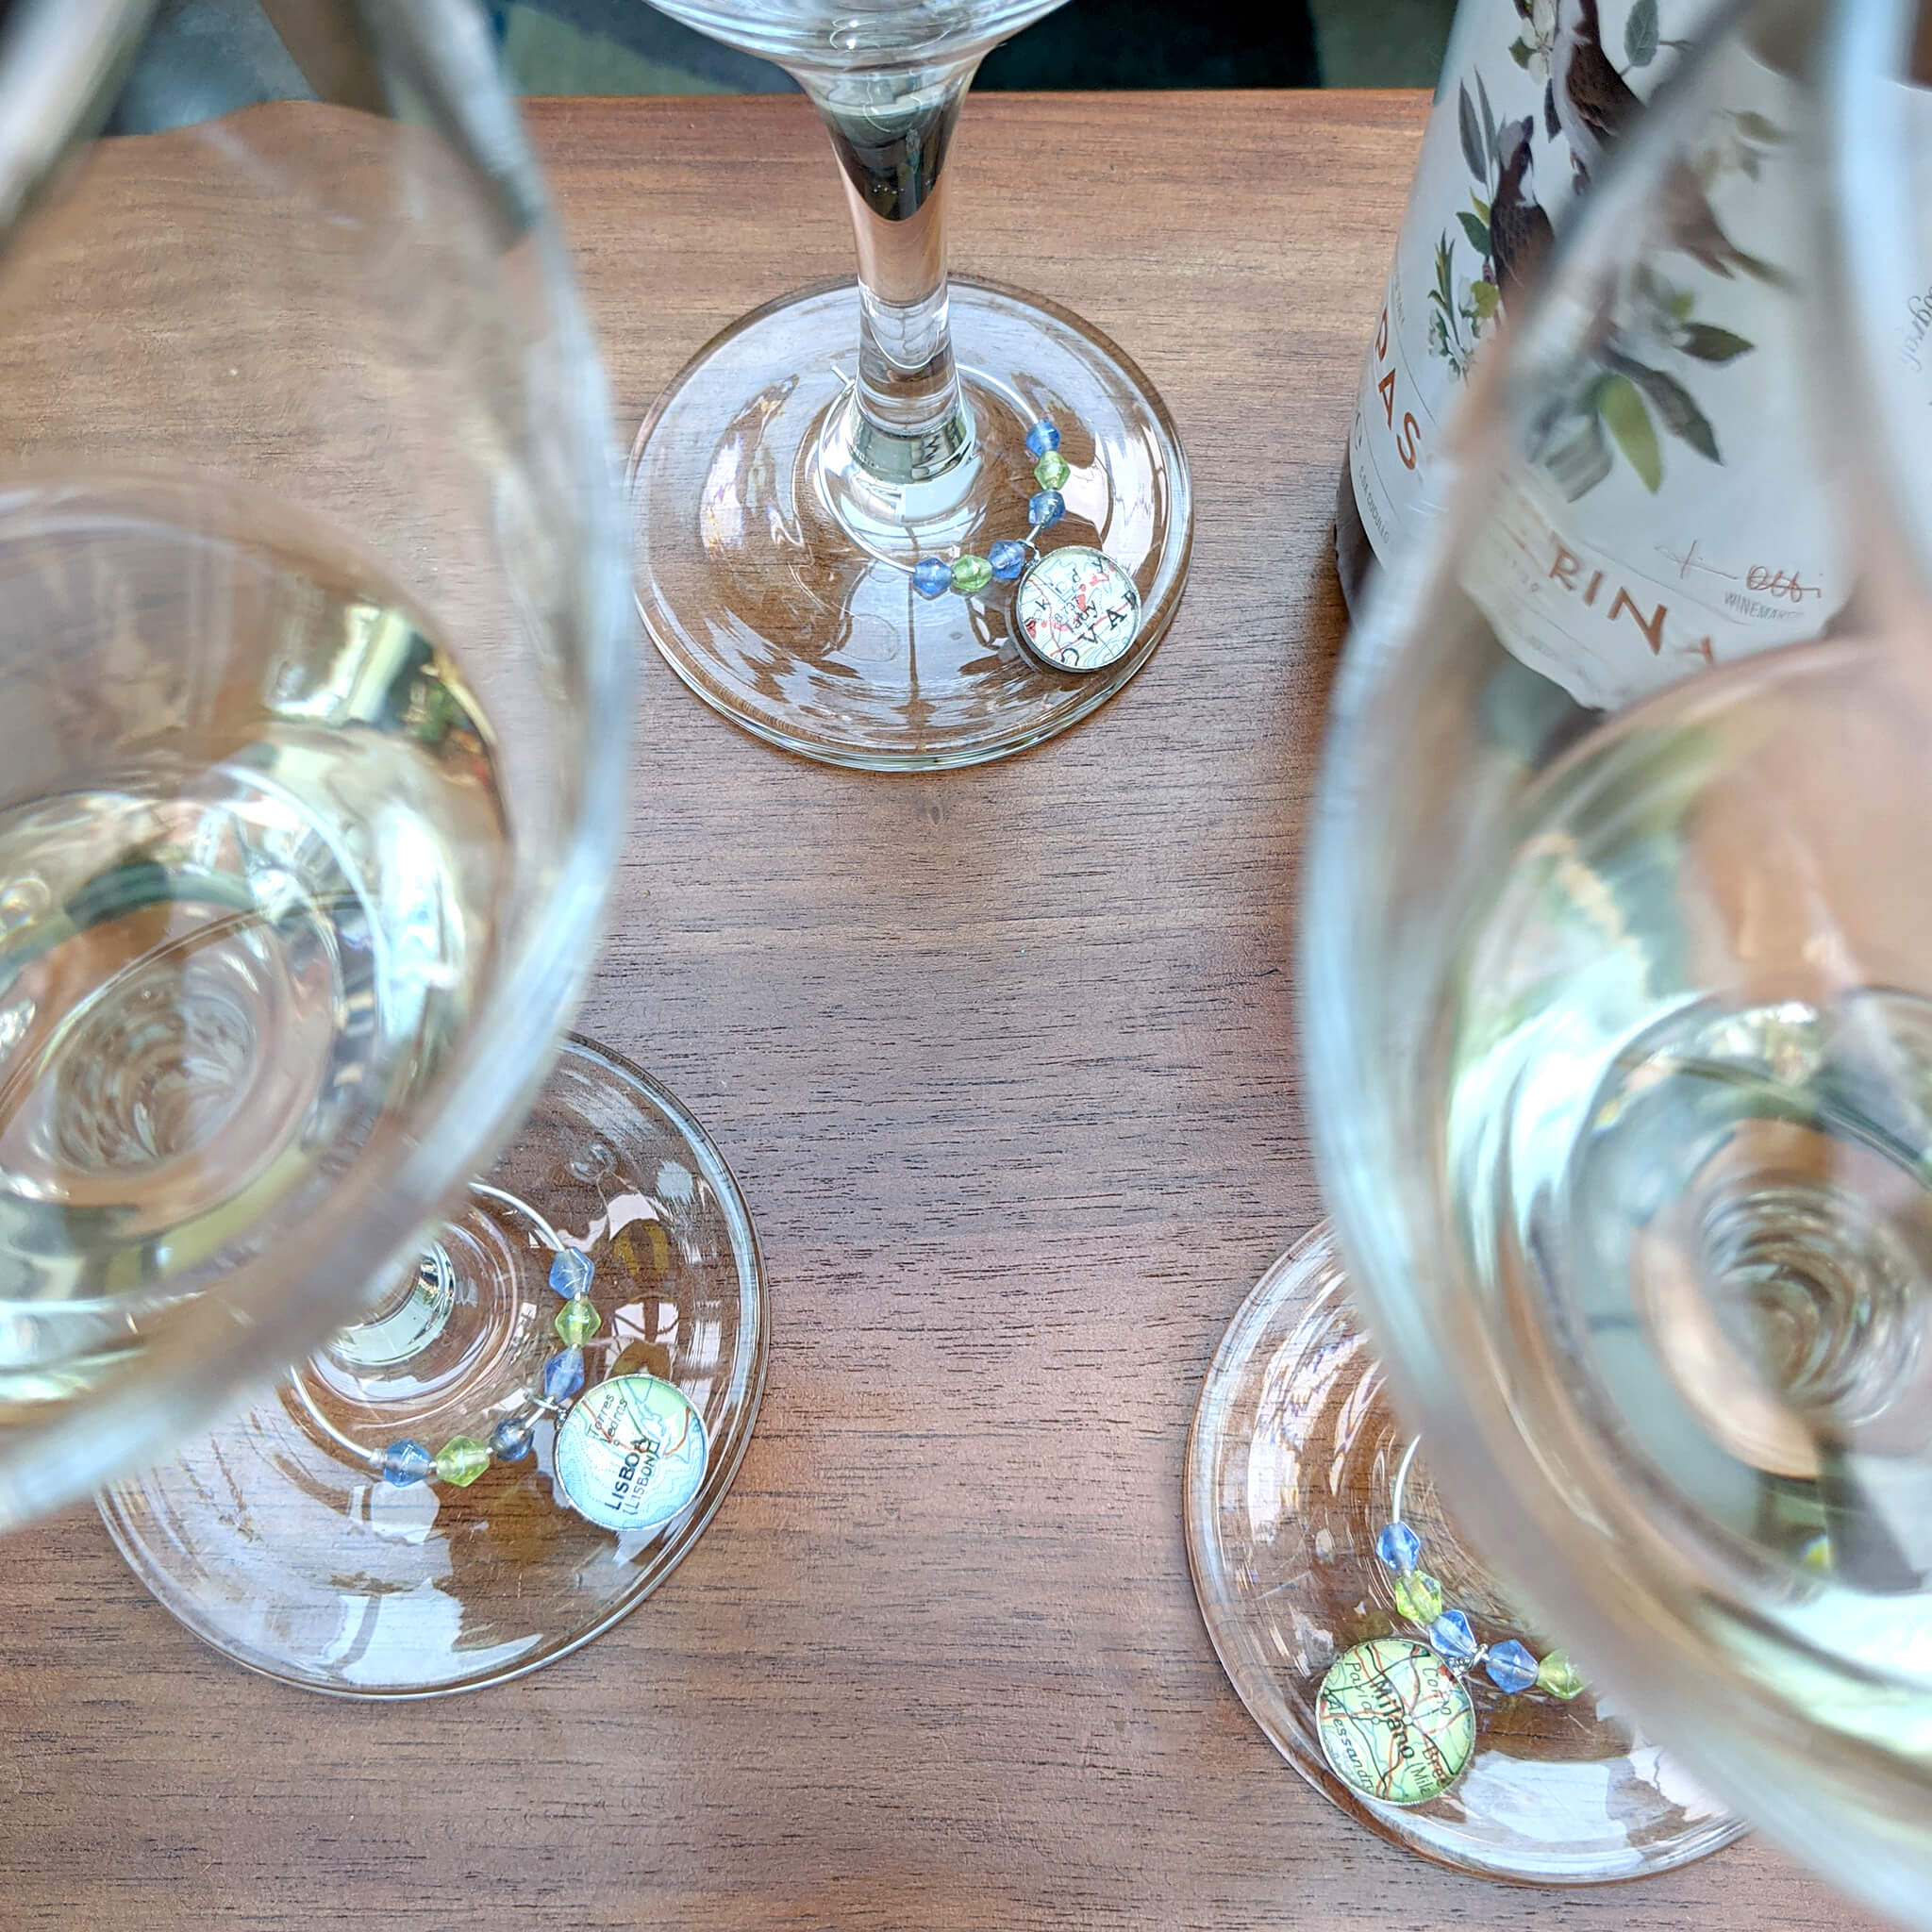 wine glasses with personalised charms with map locations